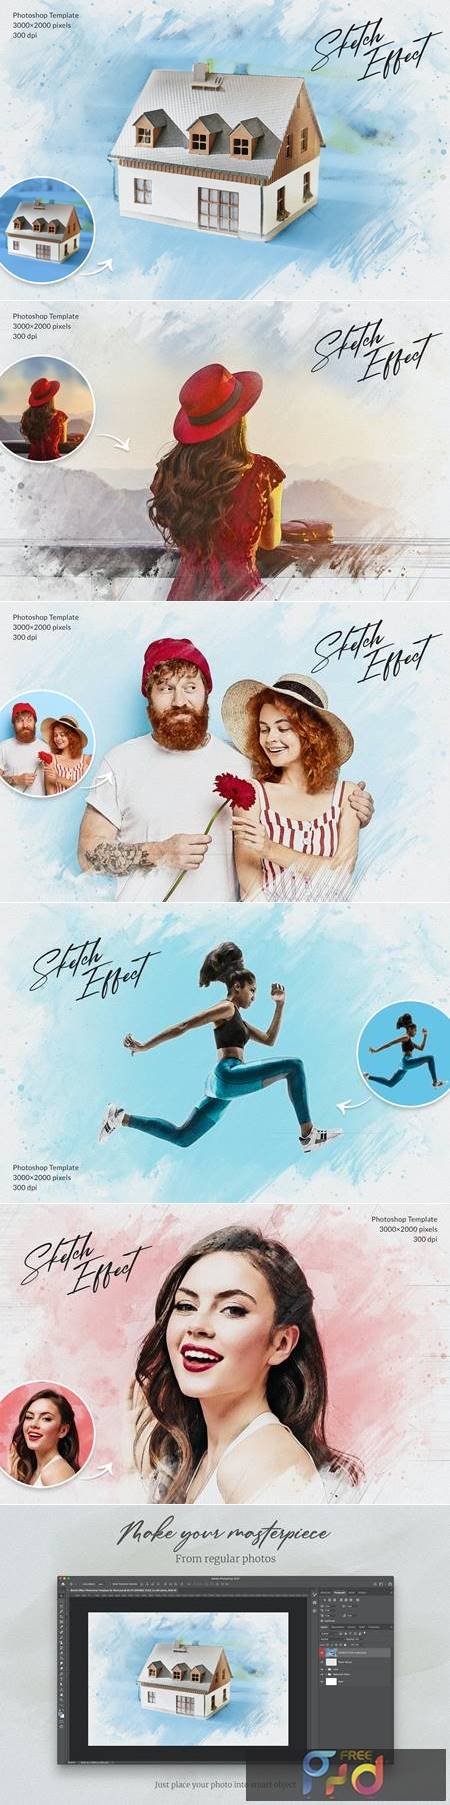 Sketch Effect   Photoshop Template